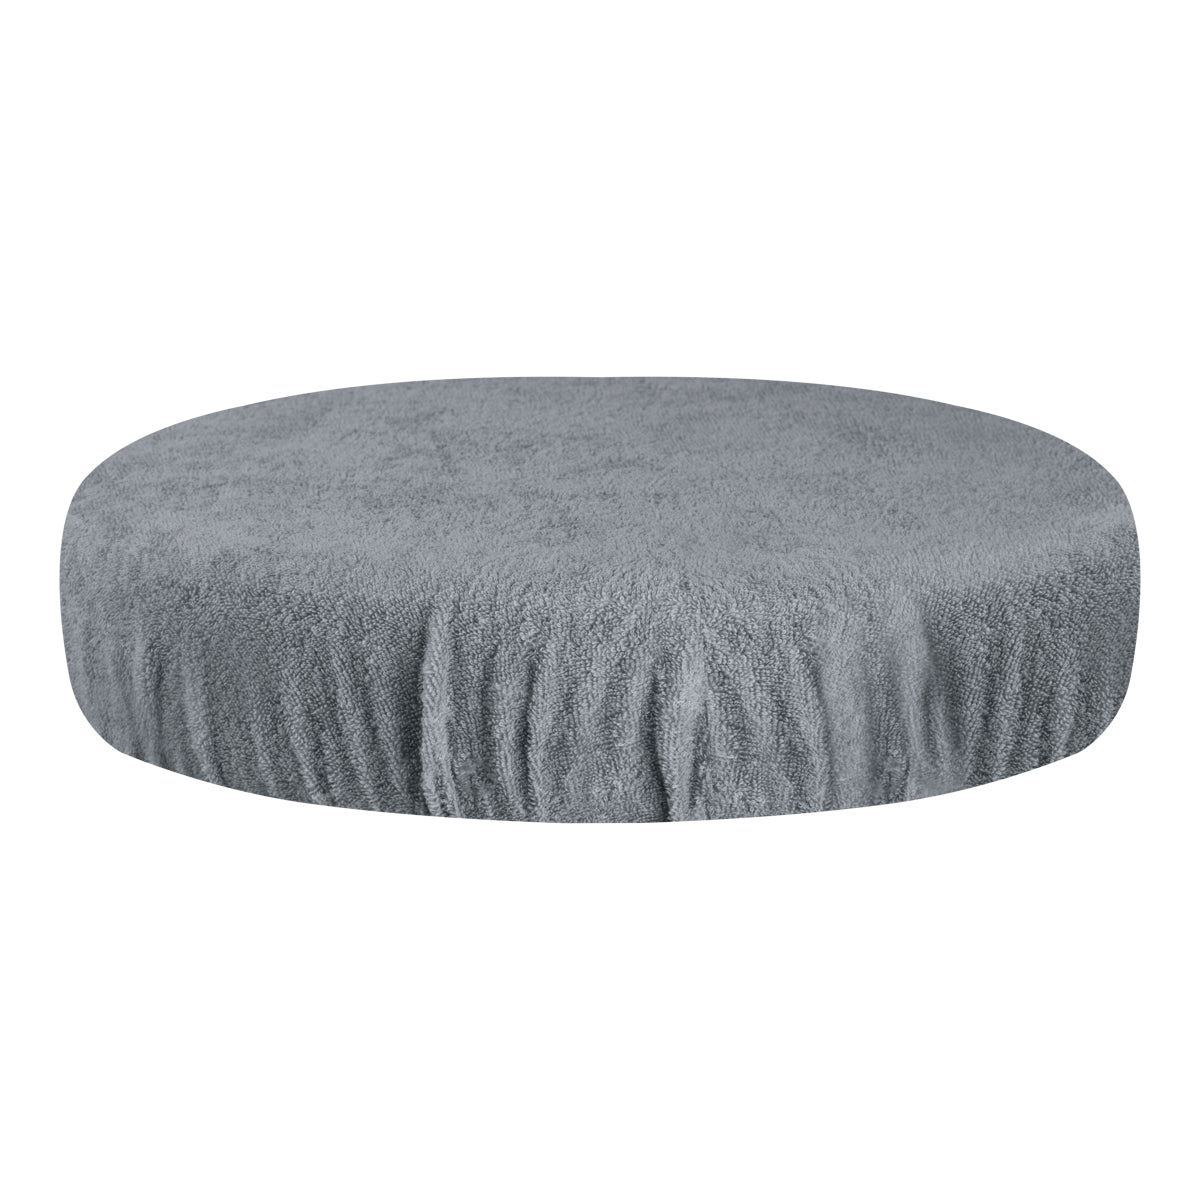 ACTIVESHOP GREY TERRY COVER FOR STOOL